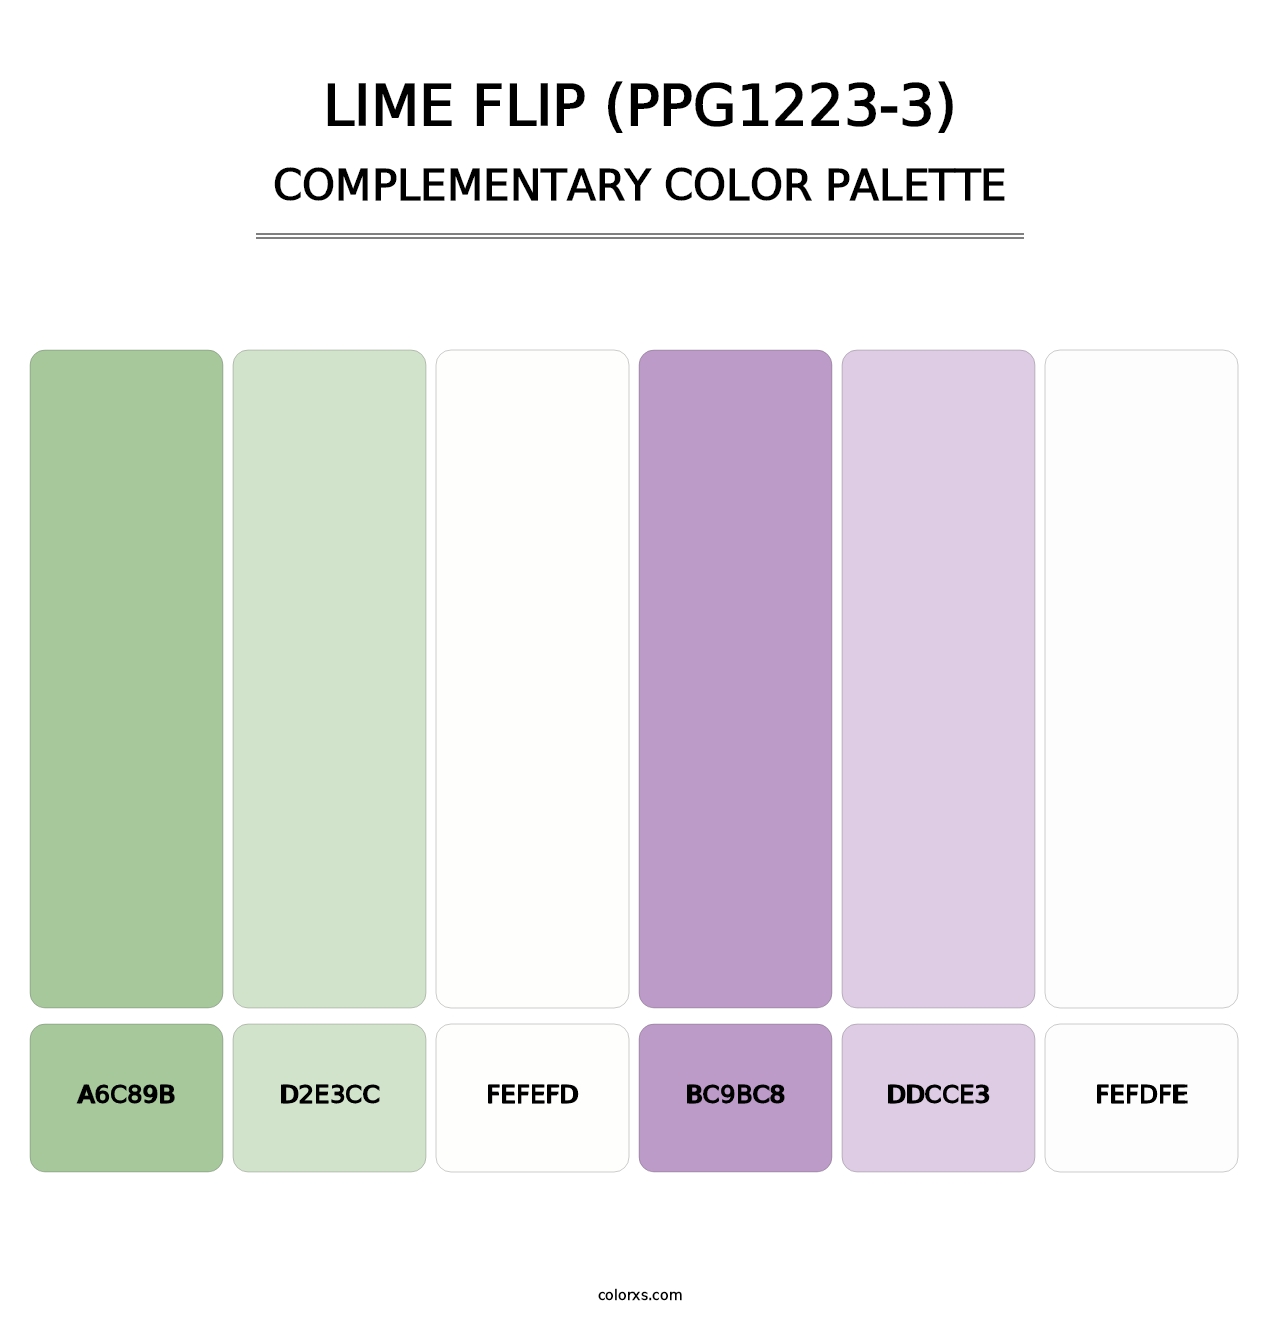 Lime Flip (PPG1223-3) - Complementary Color Palette